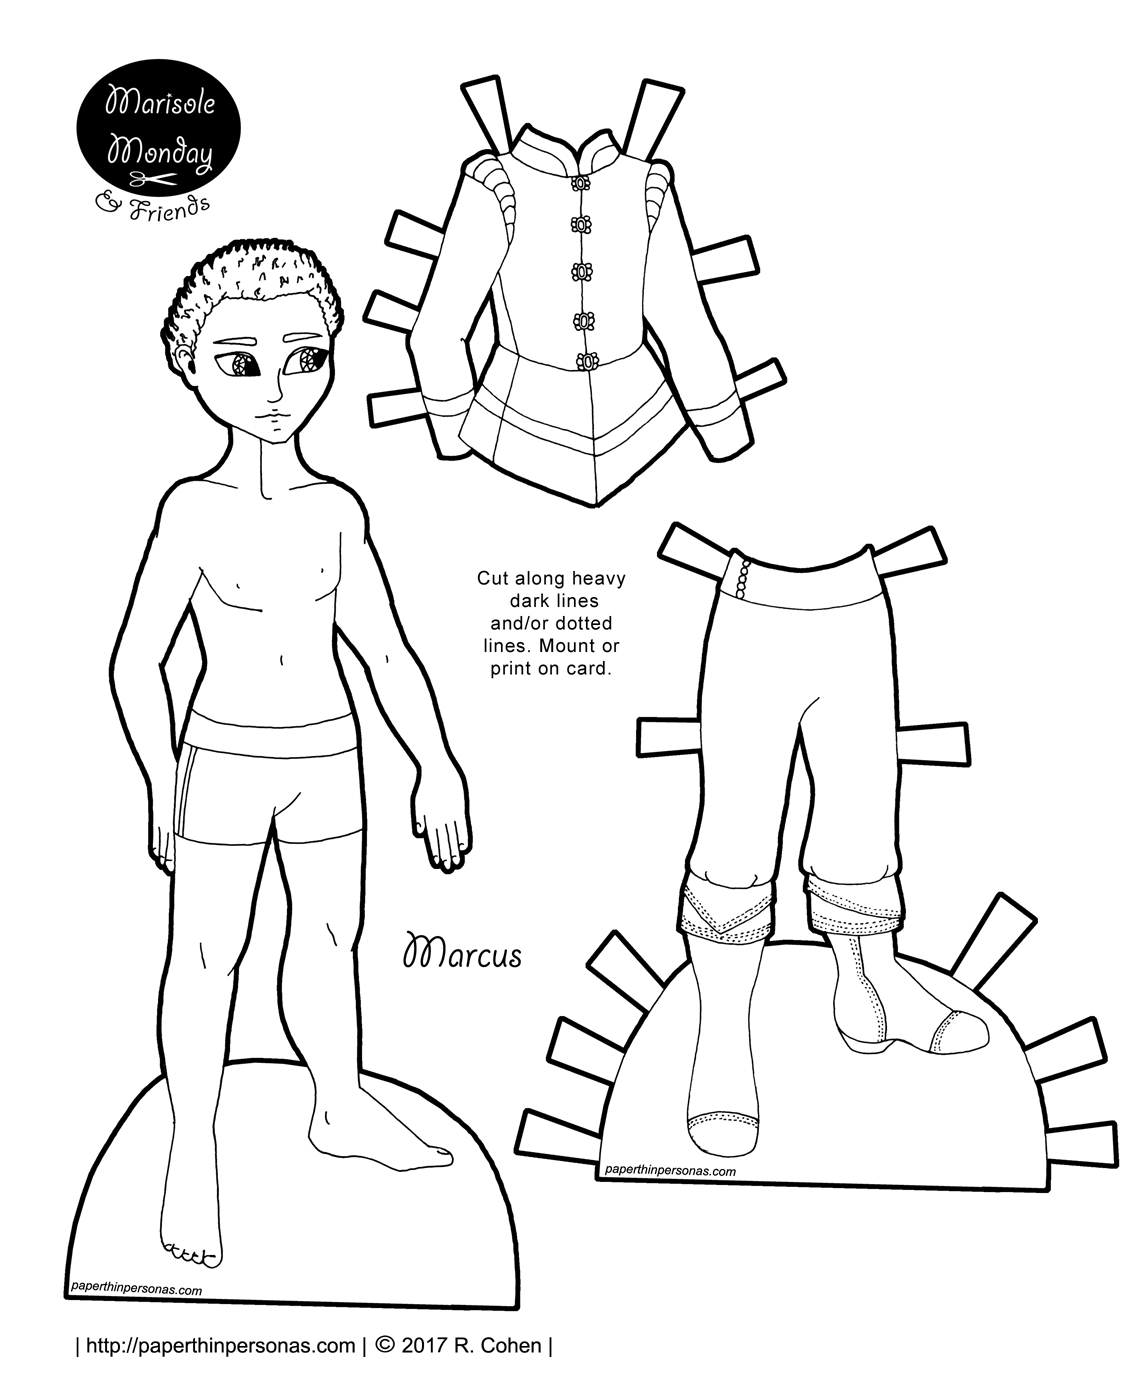 A Free Printable African-American Fairy Tale Prince Paper Doll - Free Printable Paper Dolls